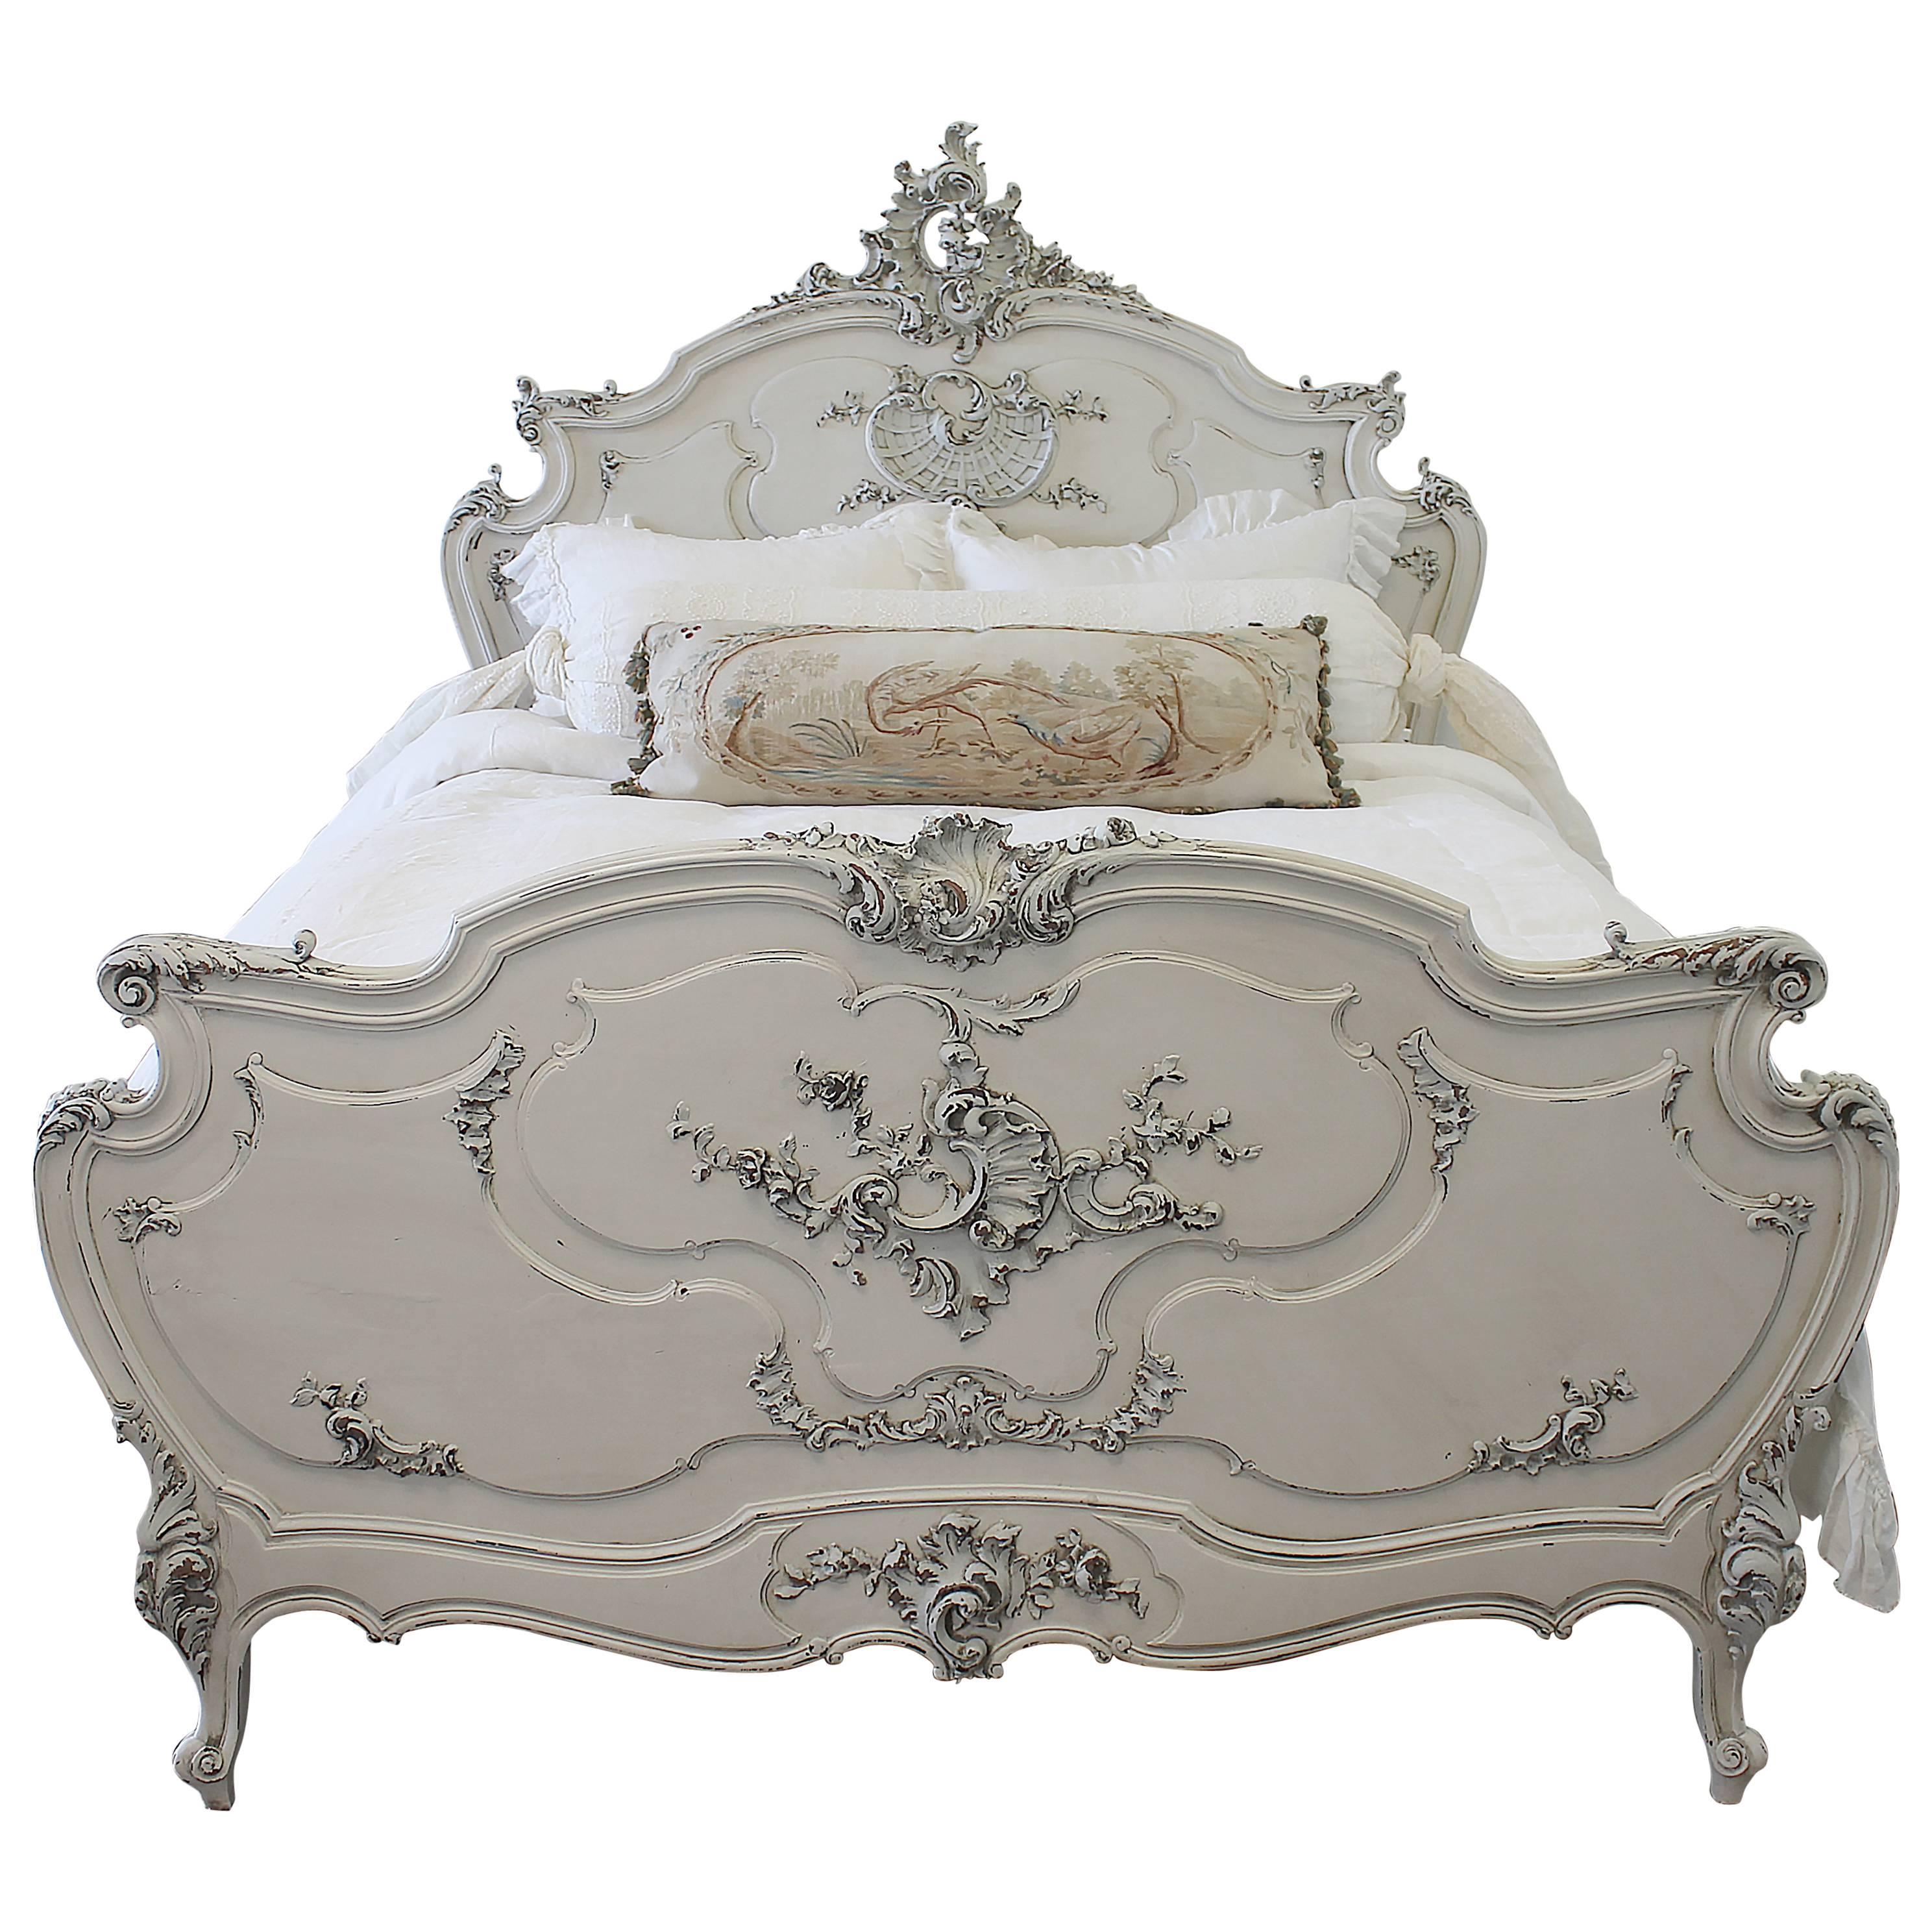 19th Century Rococo Painted Rosewood French Bed in Louis XV Style